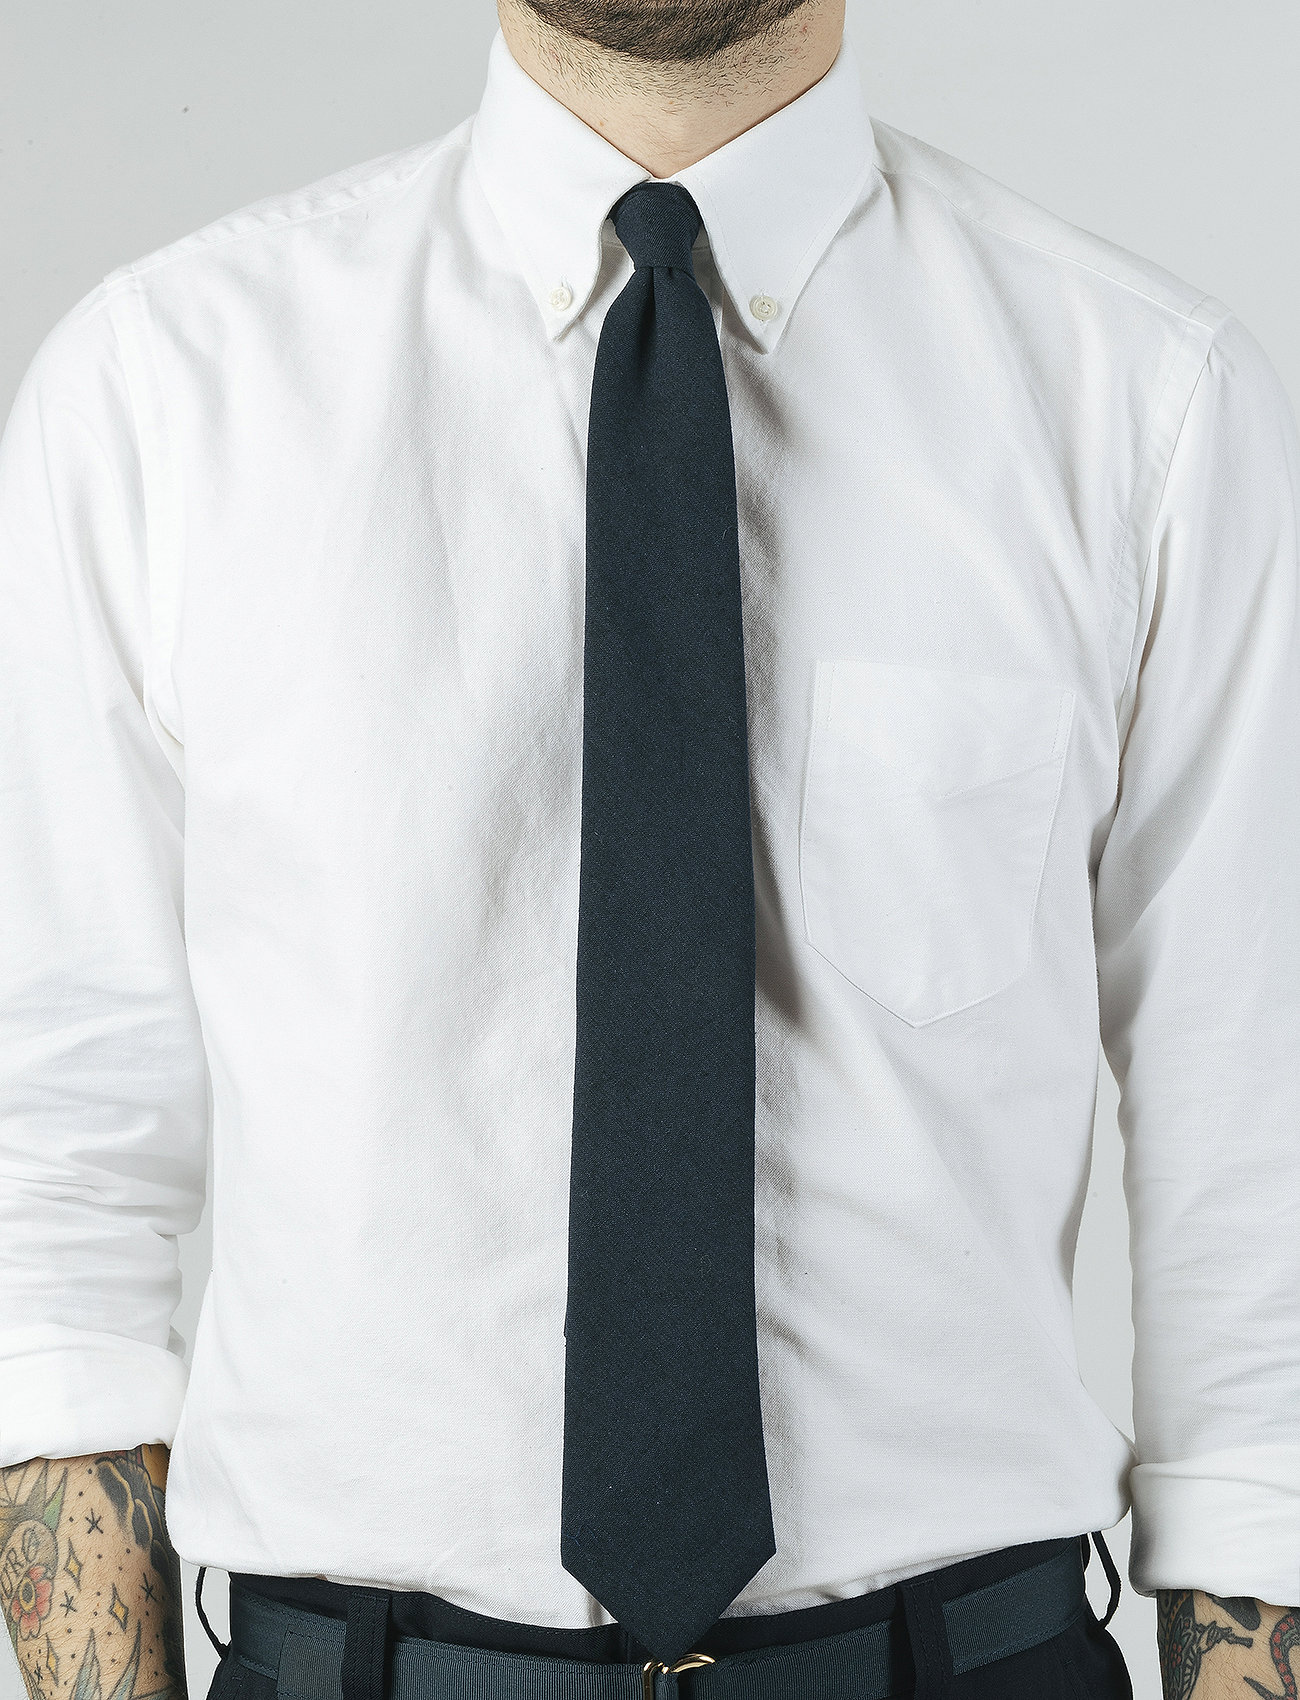 AN IVY - Solid Navy Cotton Tie - lipsud - navy - 1